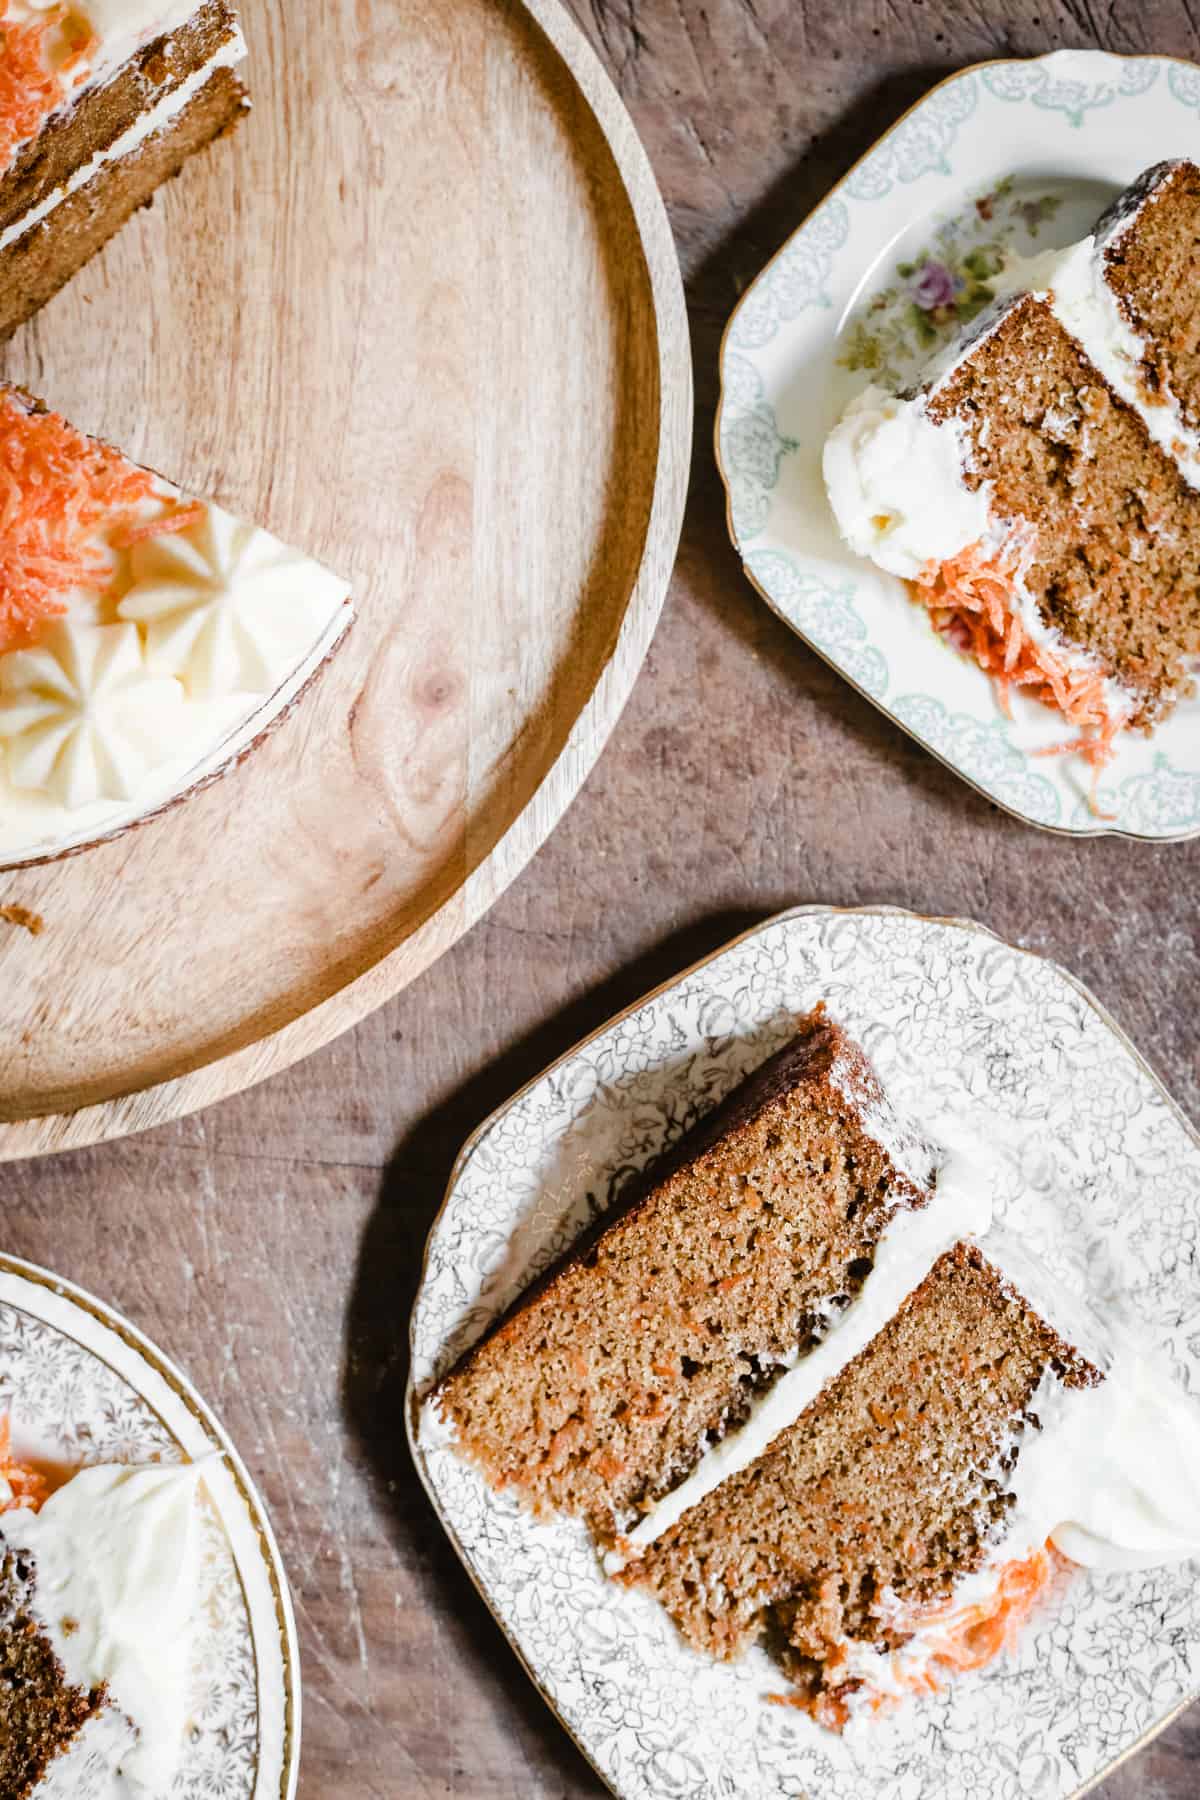 overview of a cut gluten-free carrot cake with slices on plates next to it